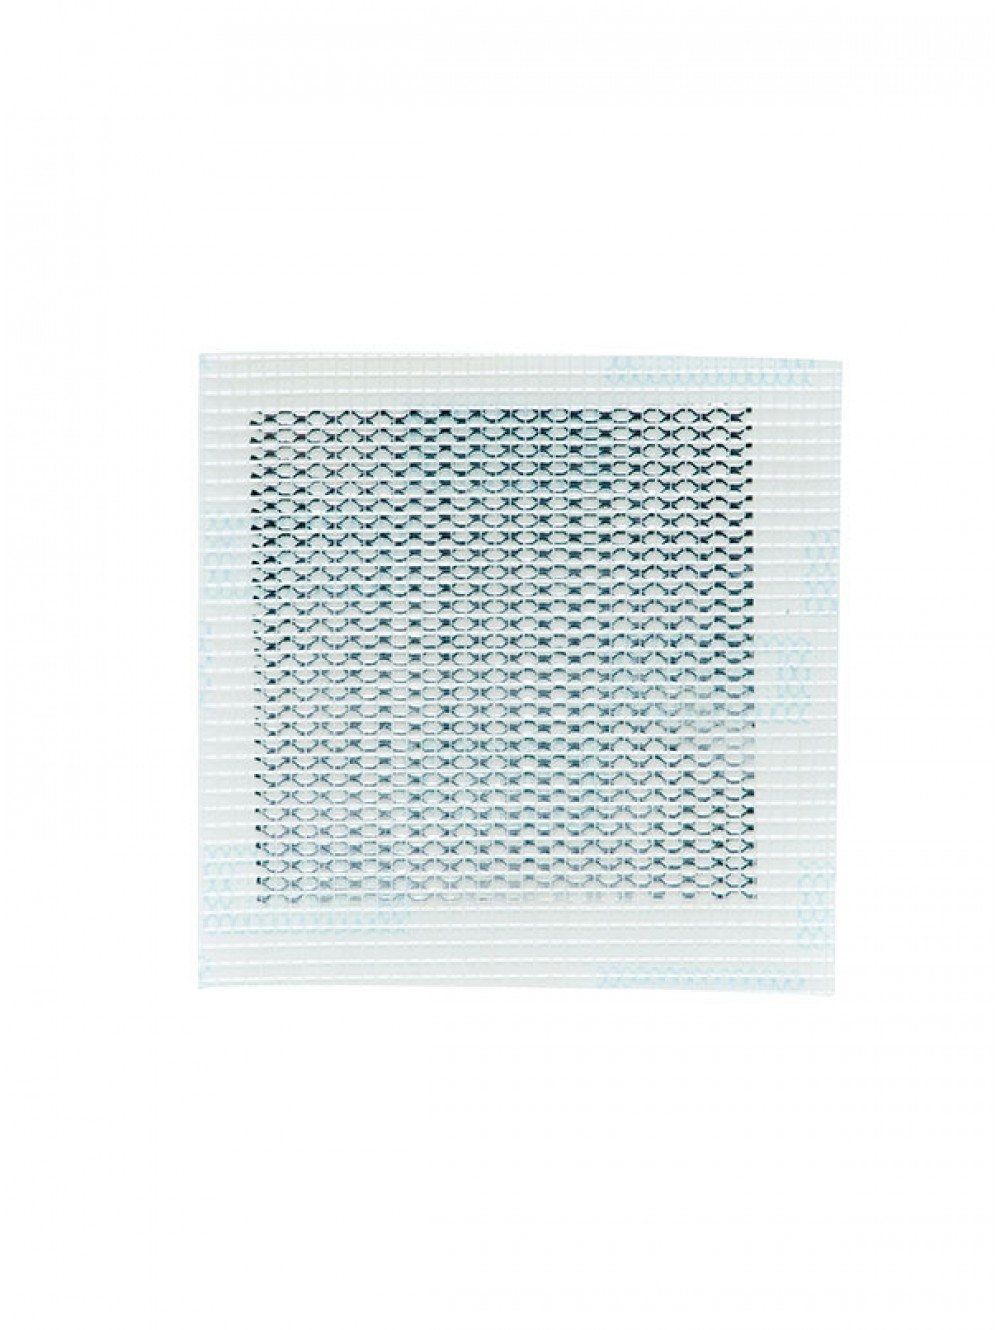 Hyde Tools 09898 4 x 4" Aluminum Mesh Drywall Wall Patch